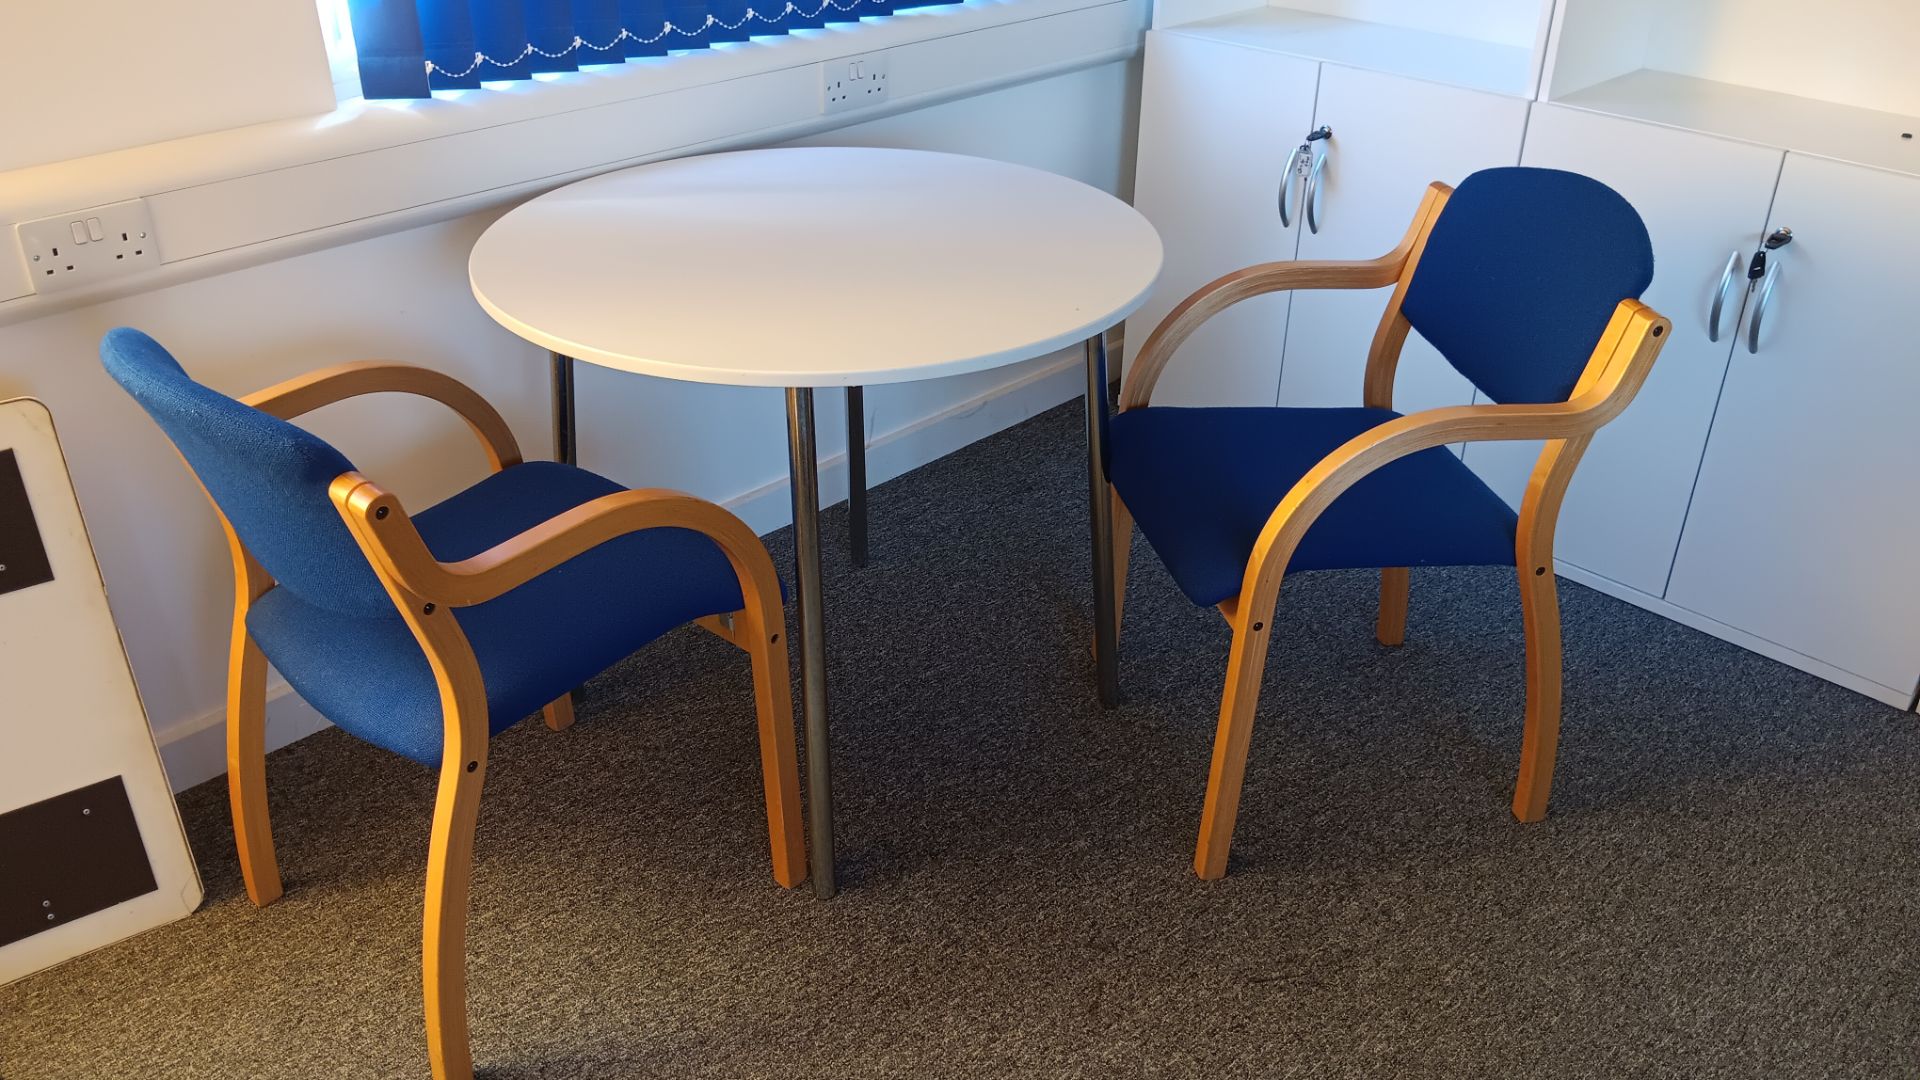 Circular white melamine table with 2 fabric upholstered chairs – Located Twyford, OX17